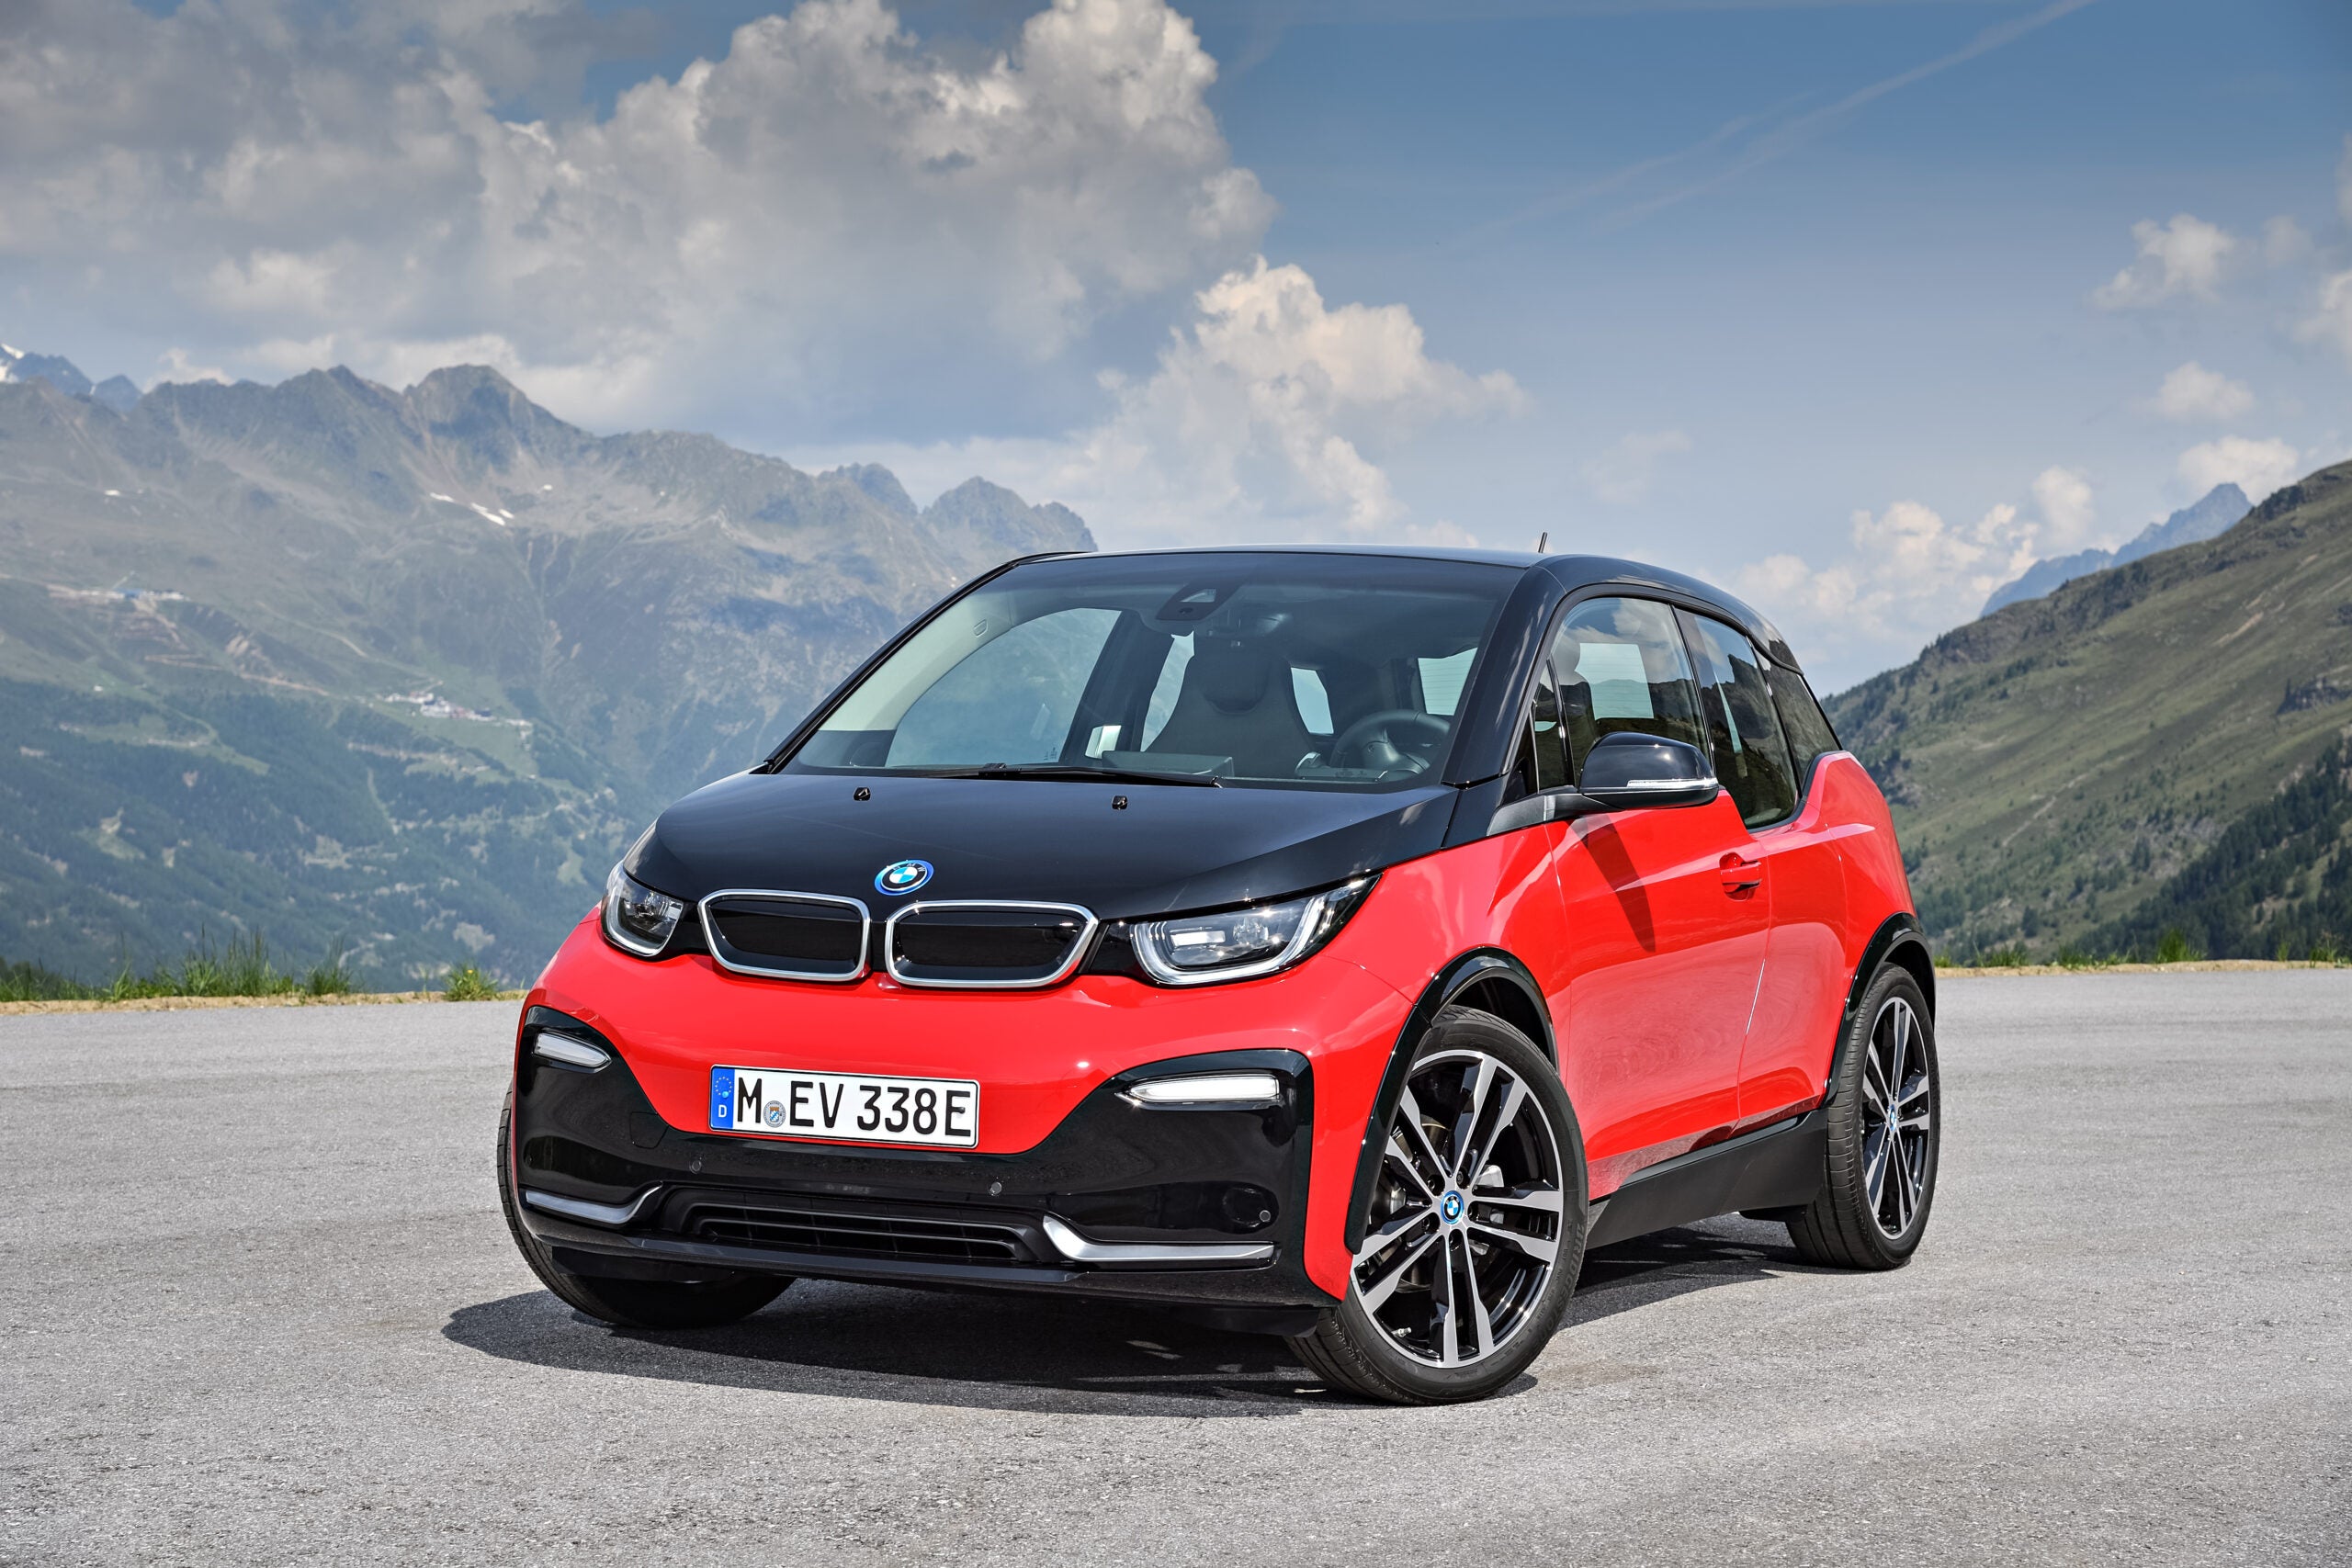 2018 BMW I3 Prices, Reviews, and Photos - MotorTrend